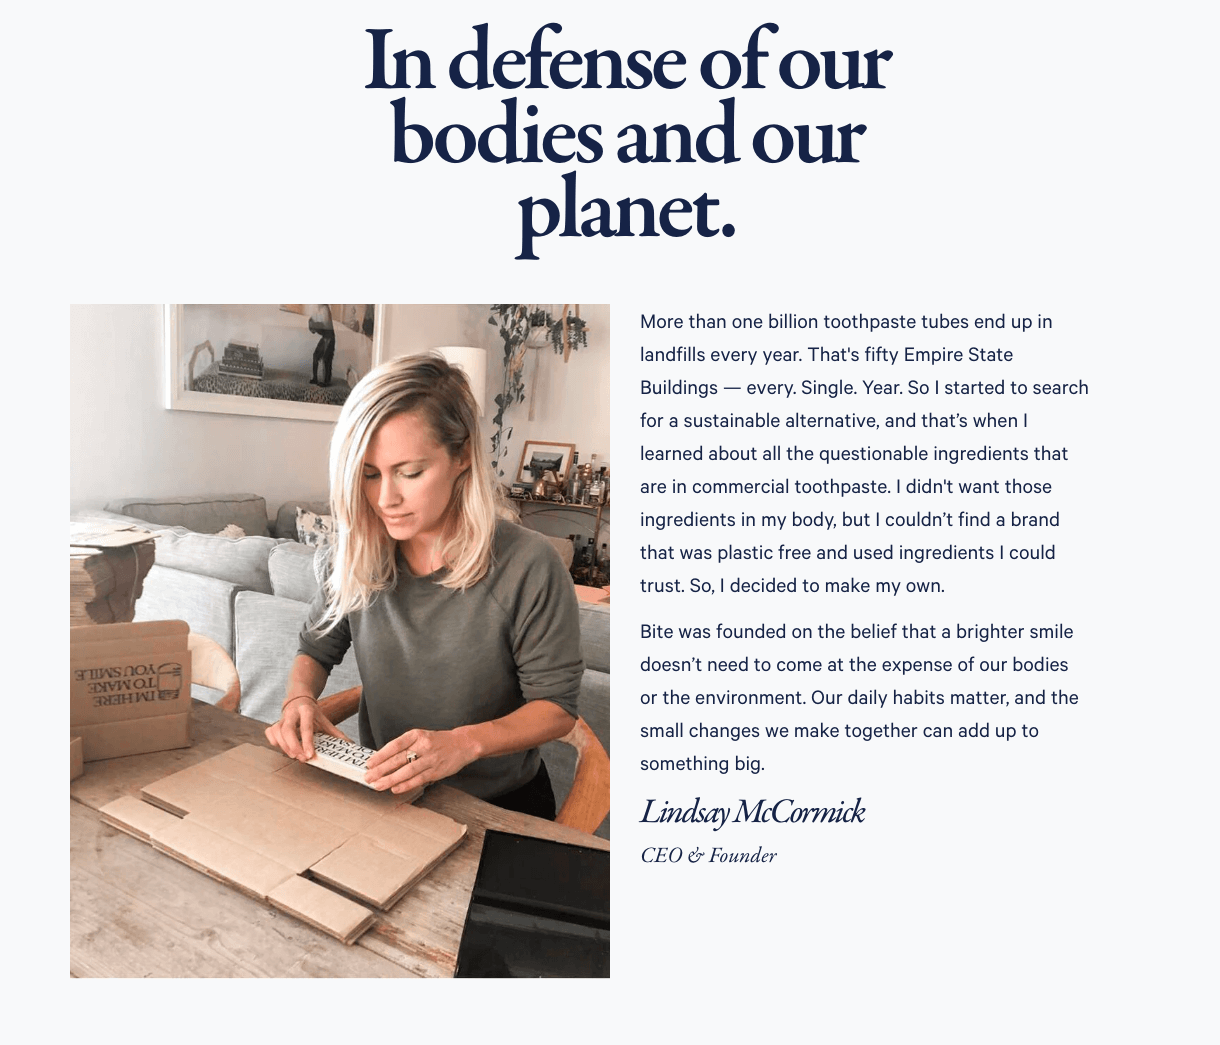 On the Bite About Us page, an image of CEO & Co-Founder, Lindsay McCormick, sitting at a desk with a Blume branded packaging box. The picture is next to a letter written from Lindsay outlining why she started the brand